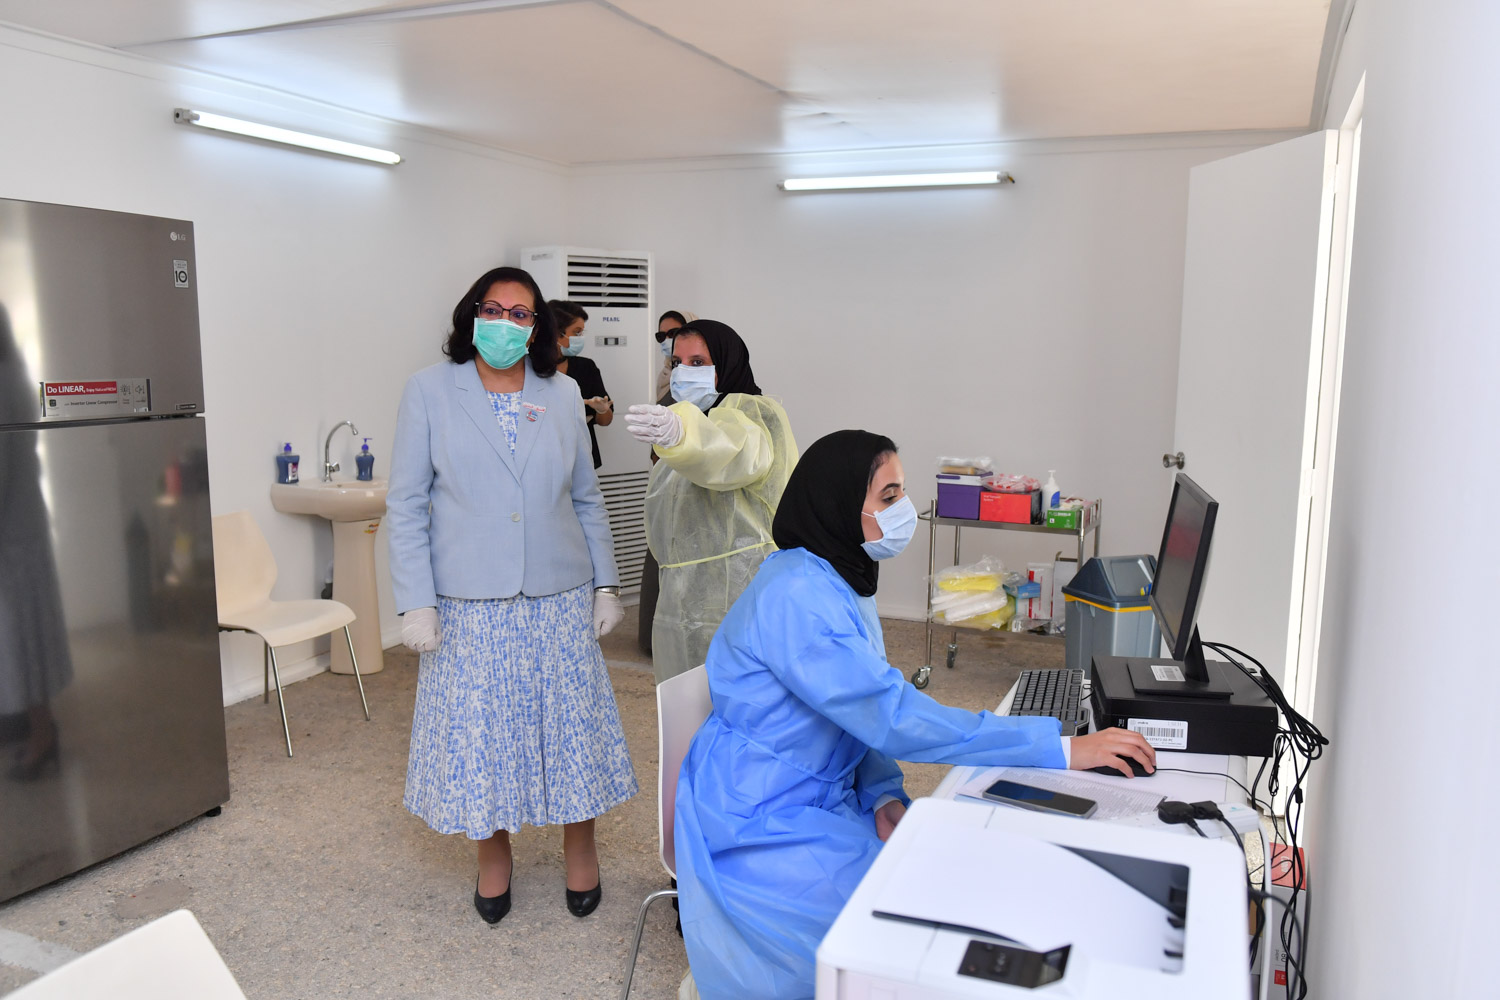 Ministry of Health launches a COVID-19 drive-through testing centre at the Bahrain International Exhibition & Convention Centre